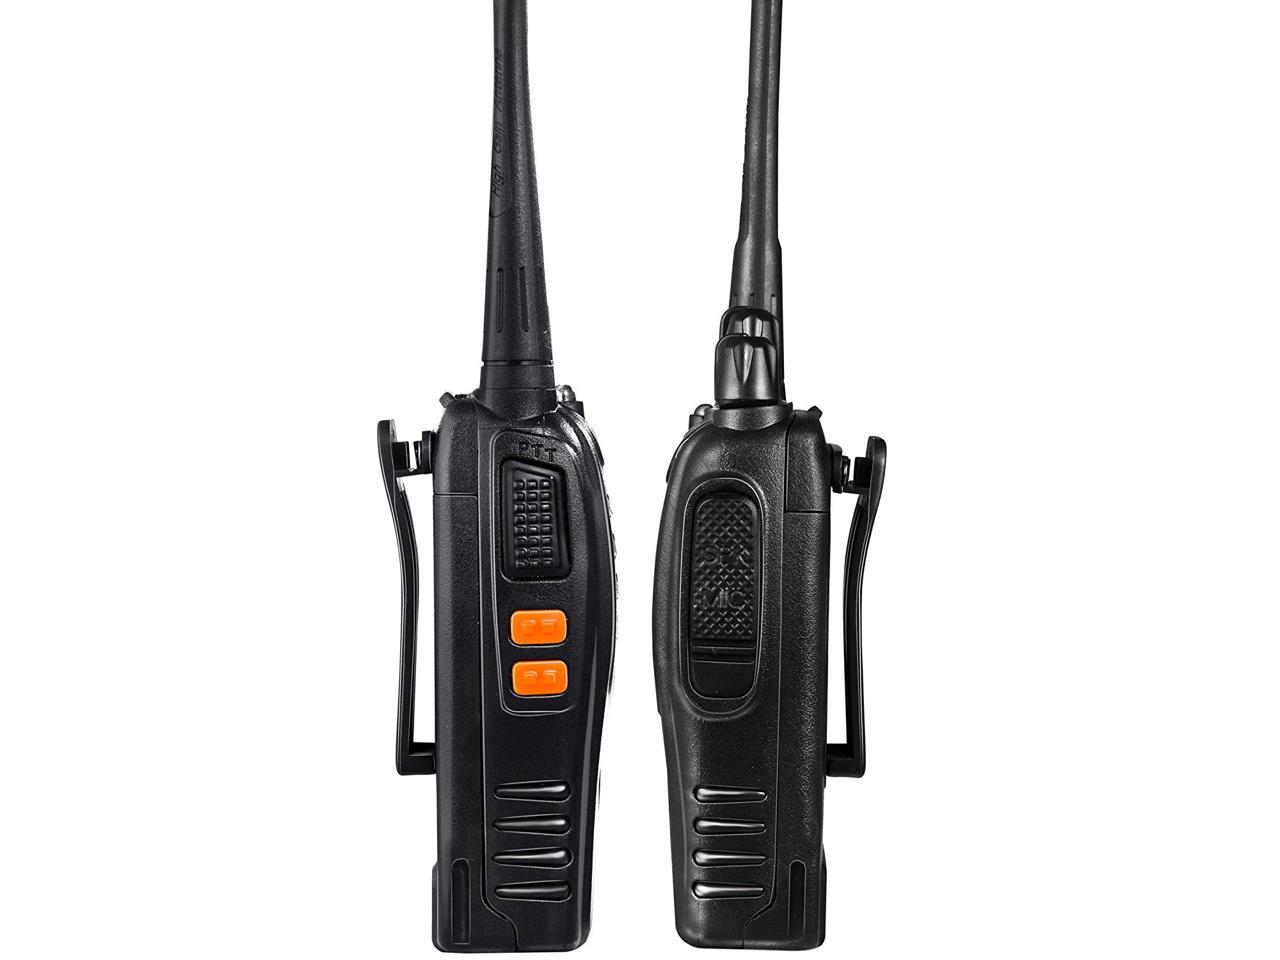 Arcshell Rechargeable Long Range Two-Way Radios with Earpiece 4 Pack UHF 400-470Mhz Walkie Talkies Li-ion Battery and Charger Included